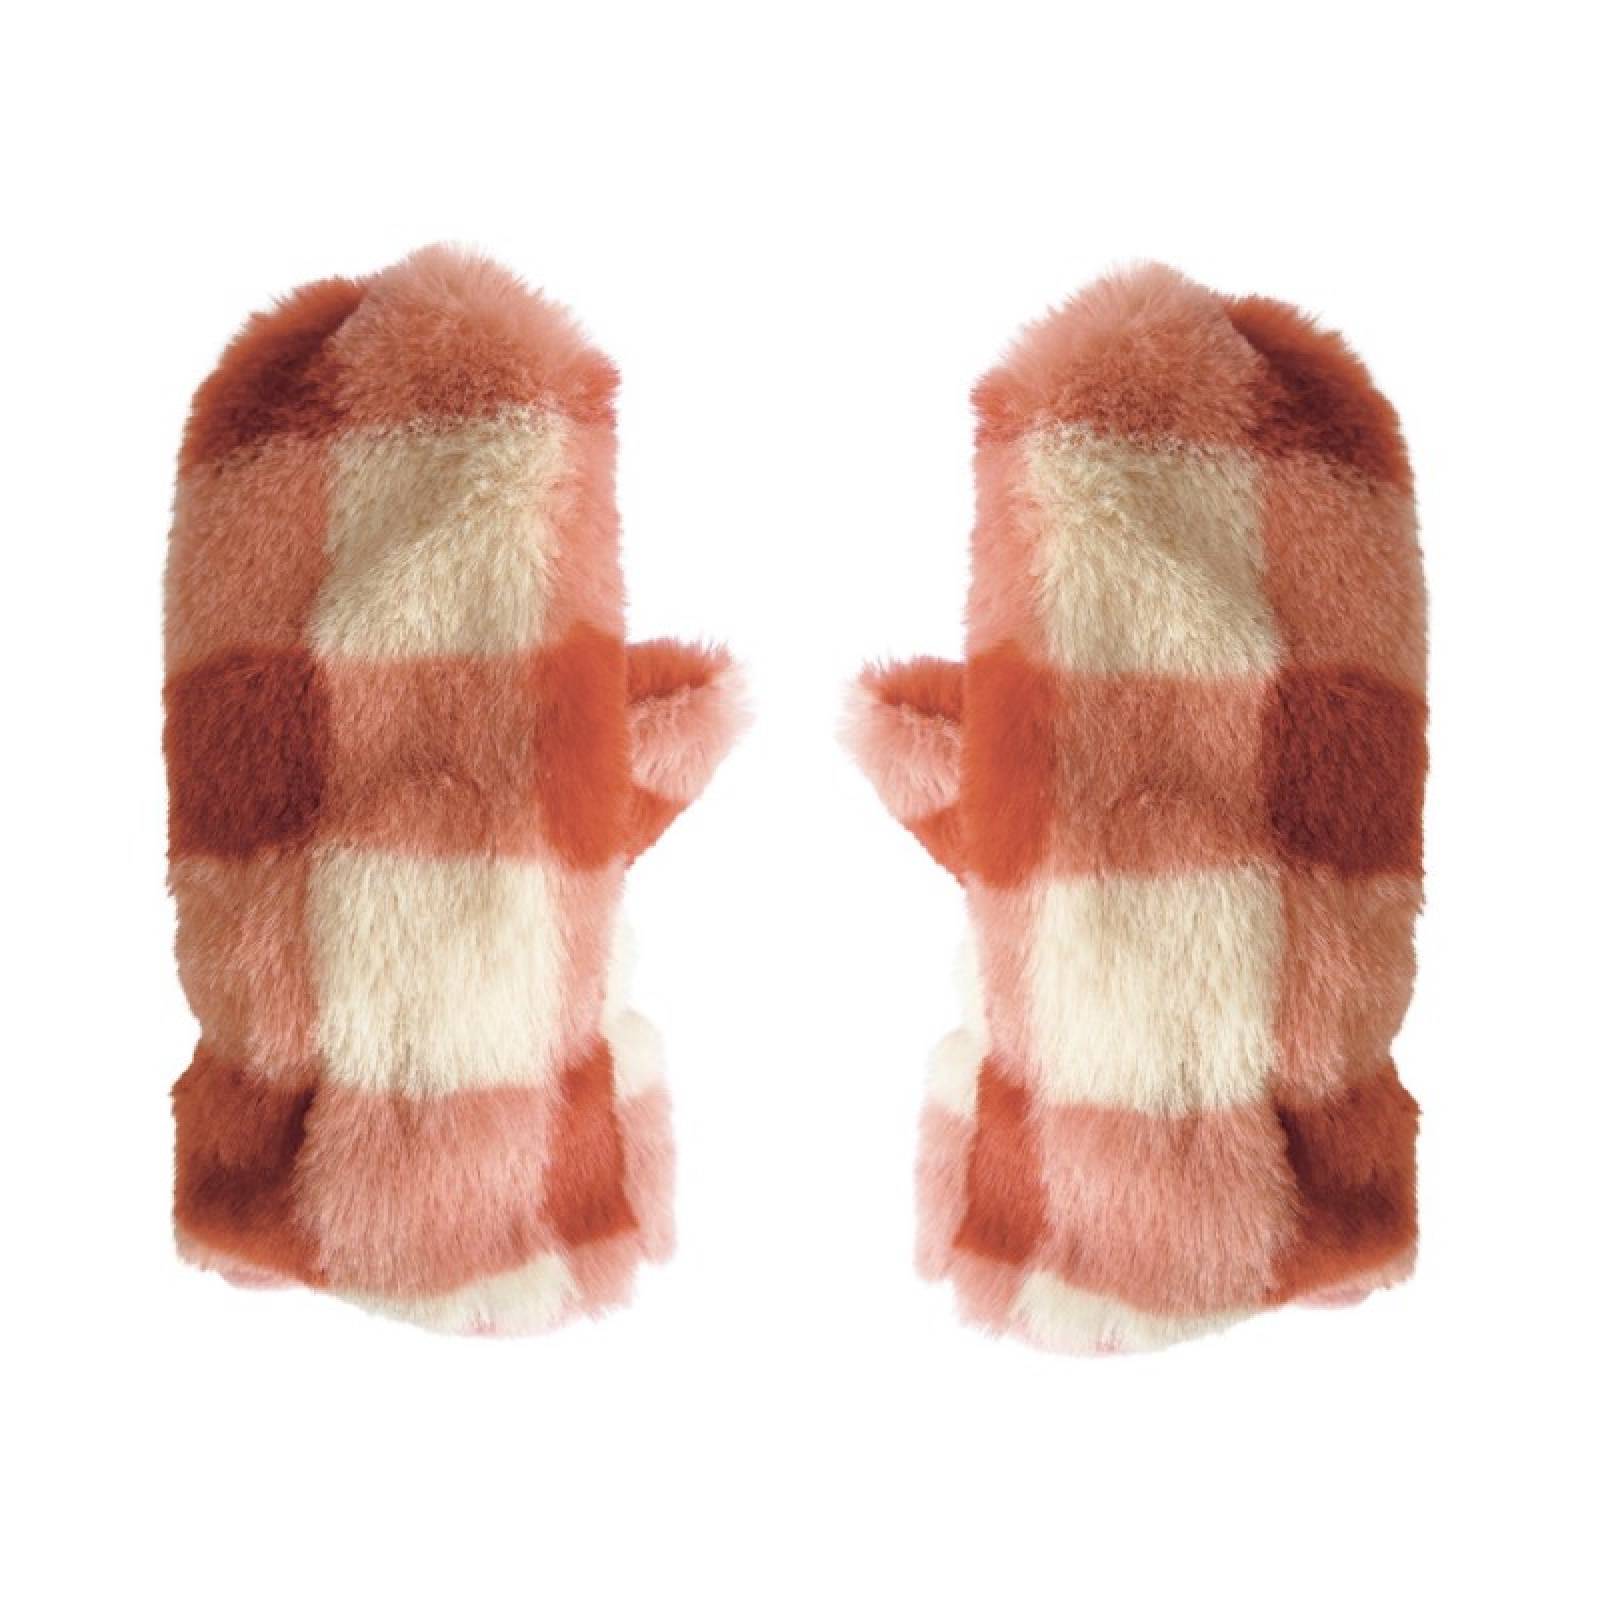 Children's Furry Checked Mittens In Coral By Rockahula 3-6 Years